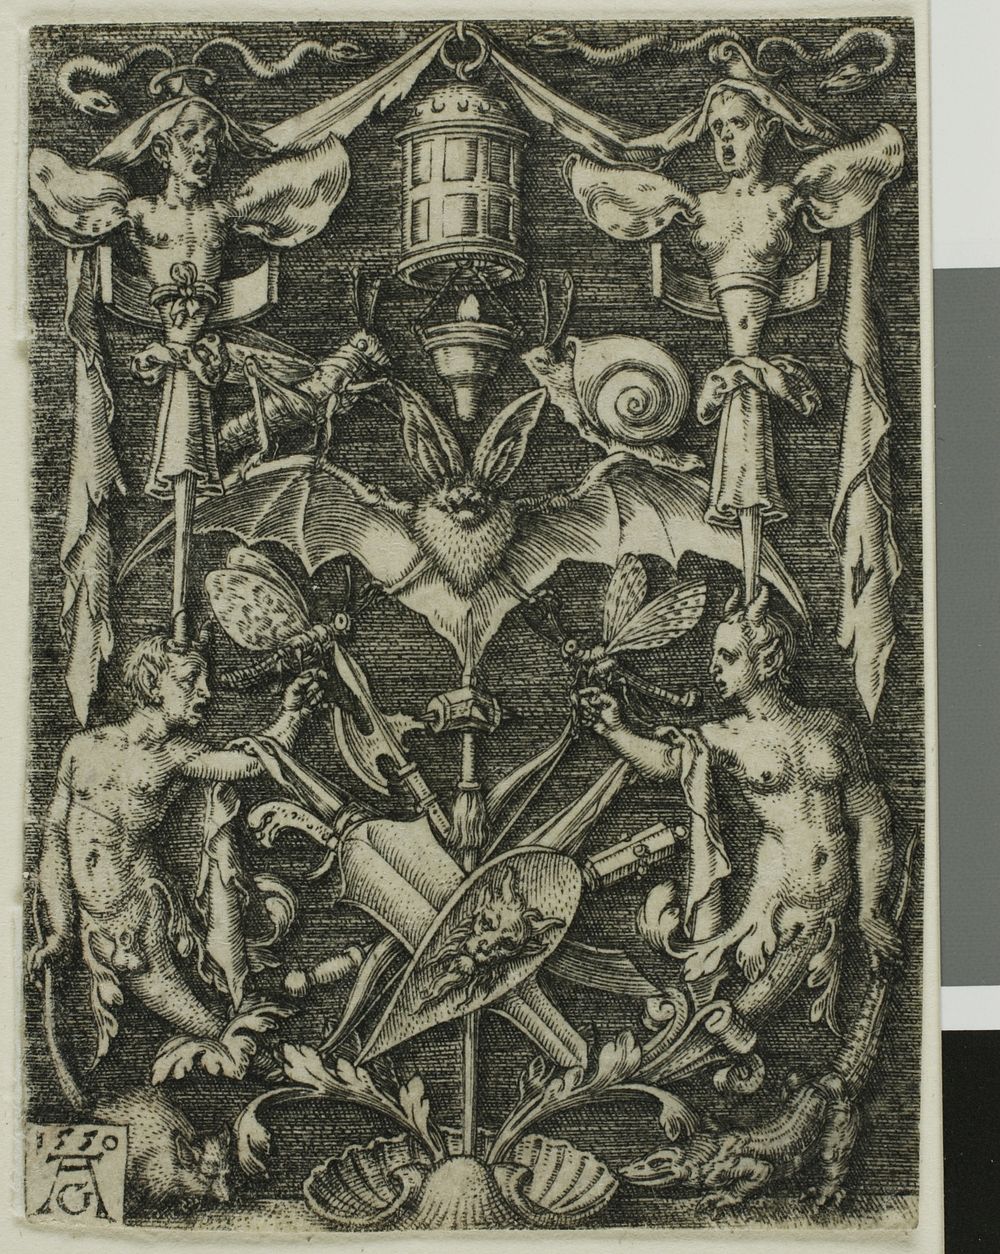 Ornamental Design with a Bat in the Centre by Heinrich Aldegrever